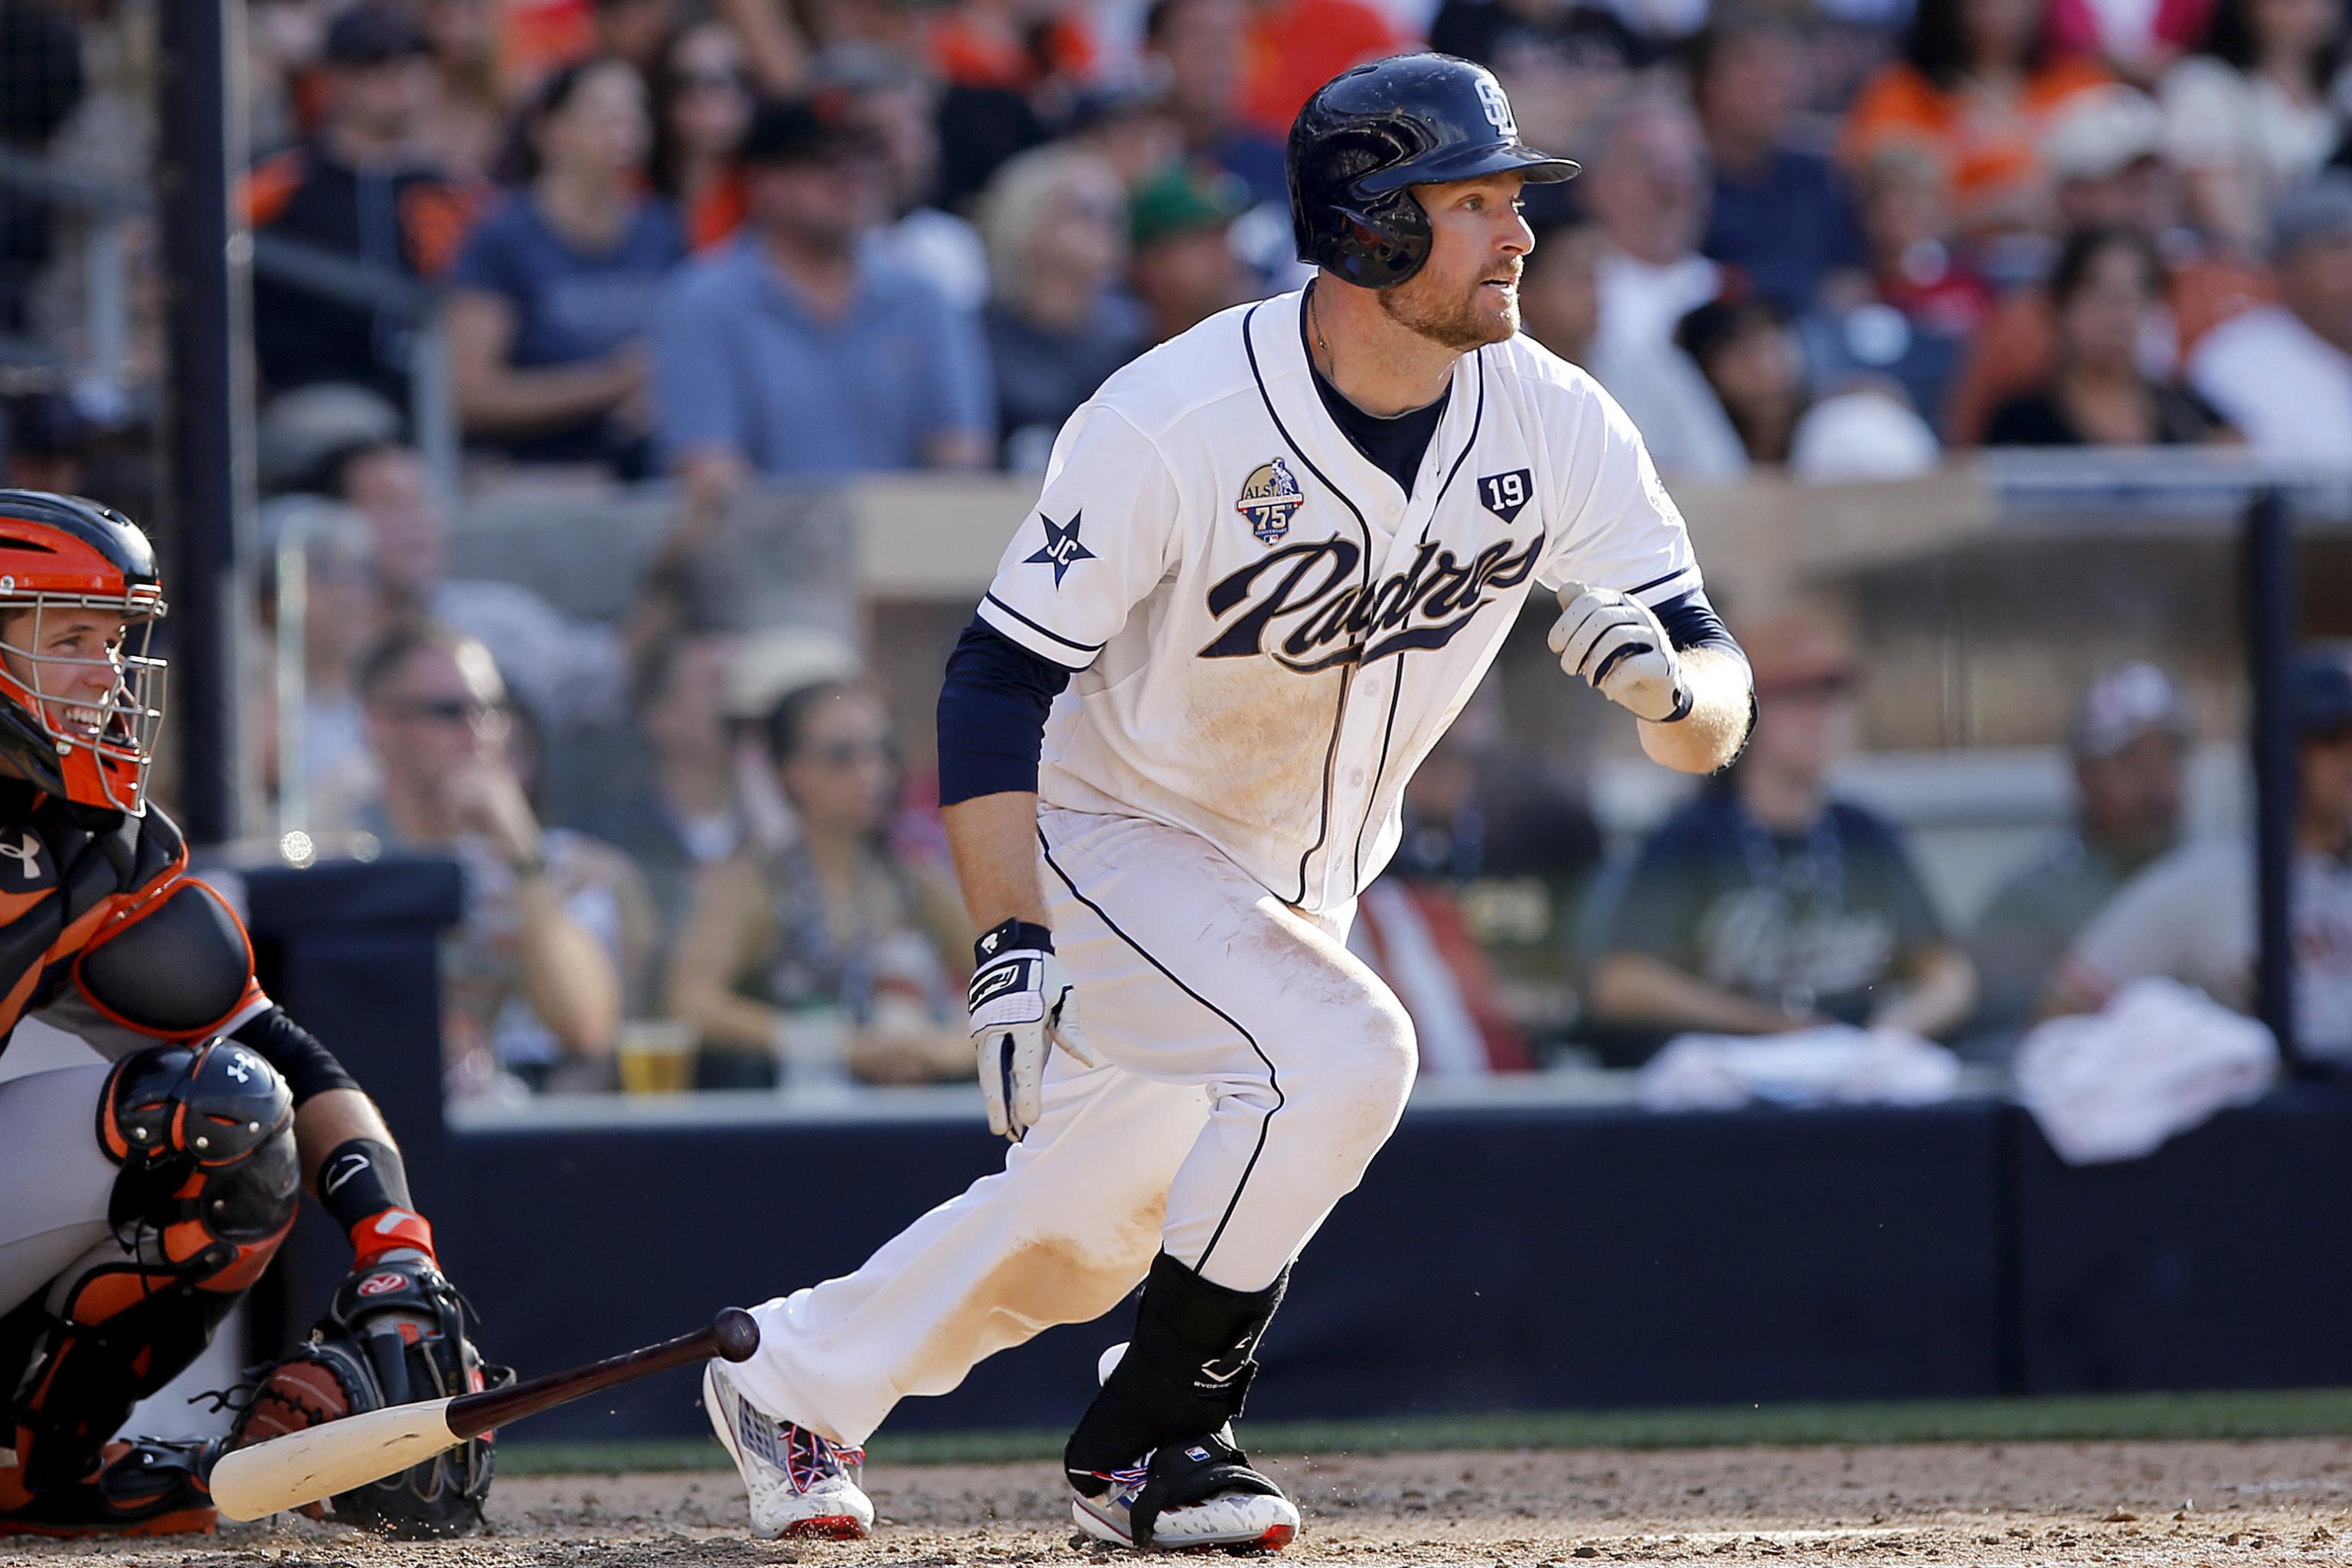 Padres avoid arbitration with Chase Headley at $8.575 million - NBC Sports